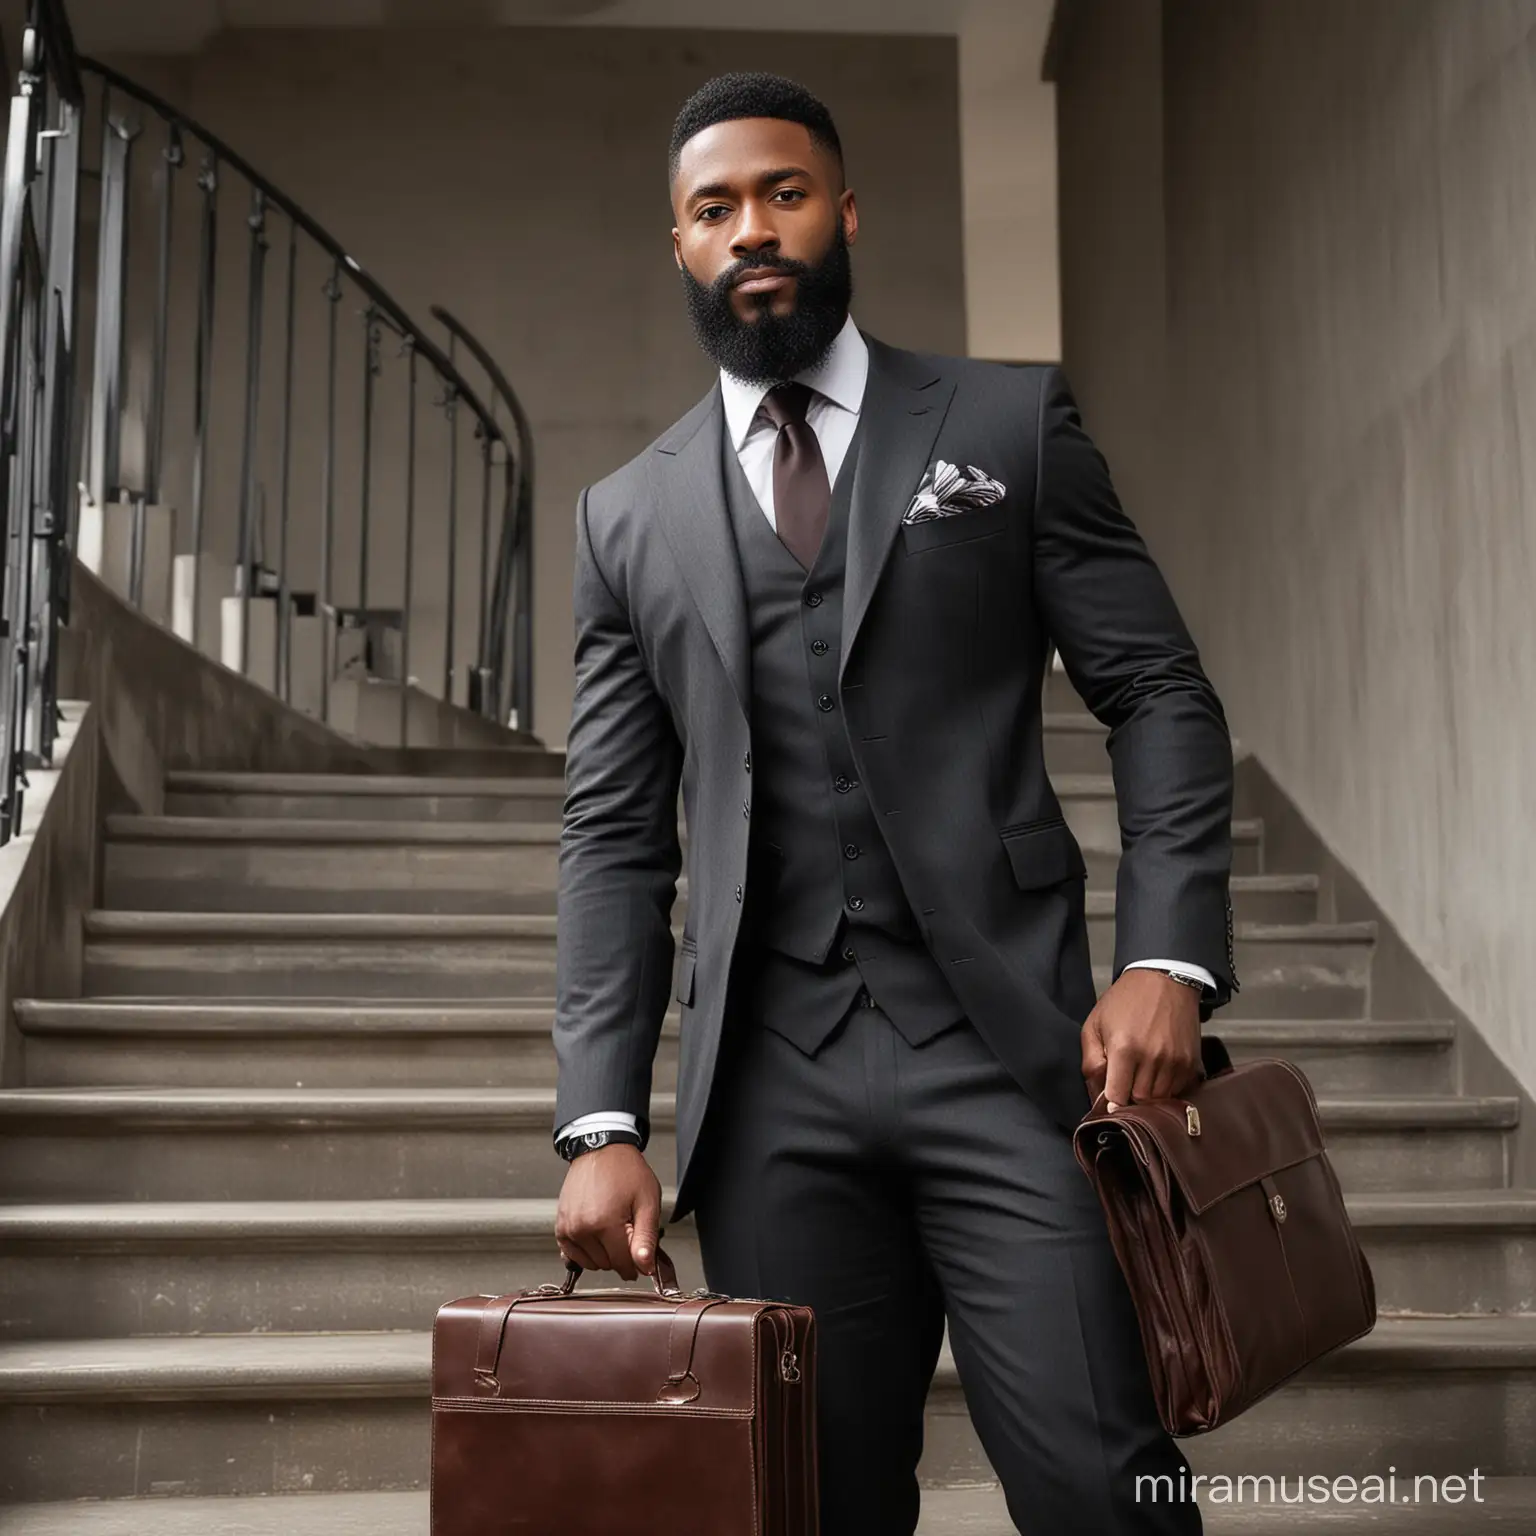 black man, full beard, fit, full hair,,  Staircase in background, holding a briefcase, business suit